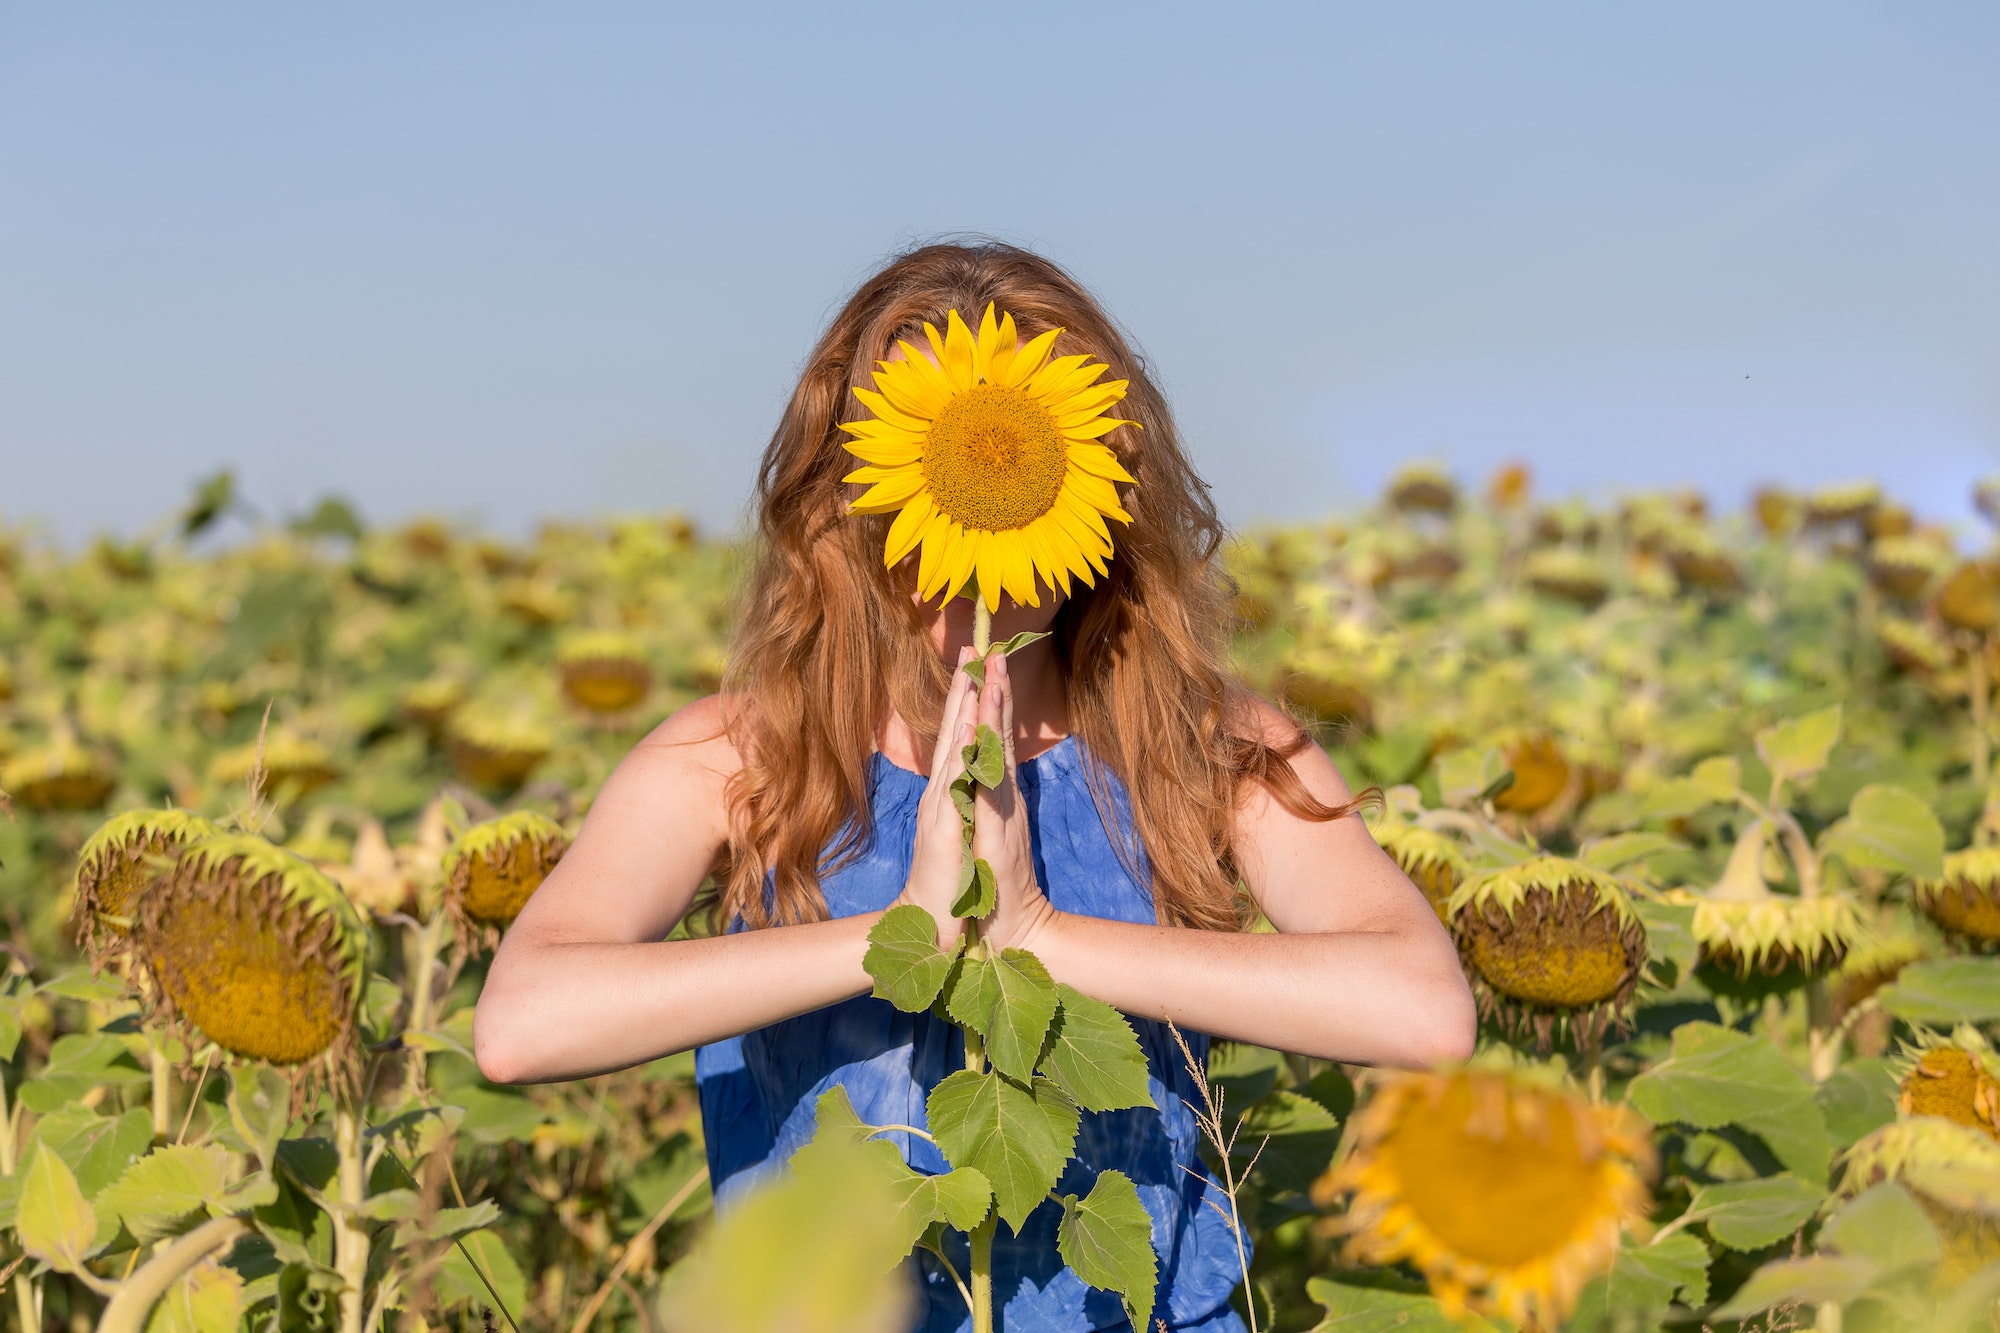 Woman practicing mindfulness in the field of sunflowers. Namaste, om, positive approach to life.